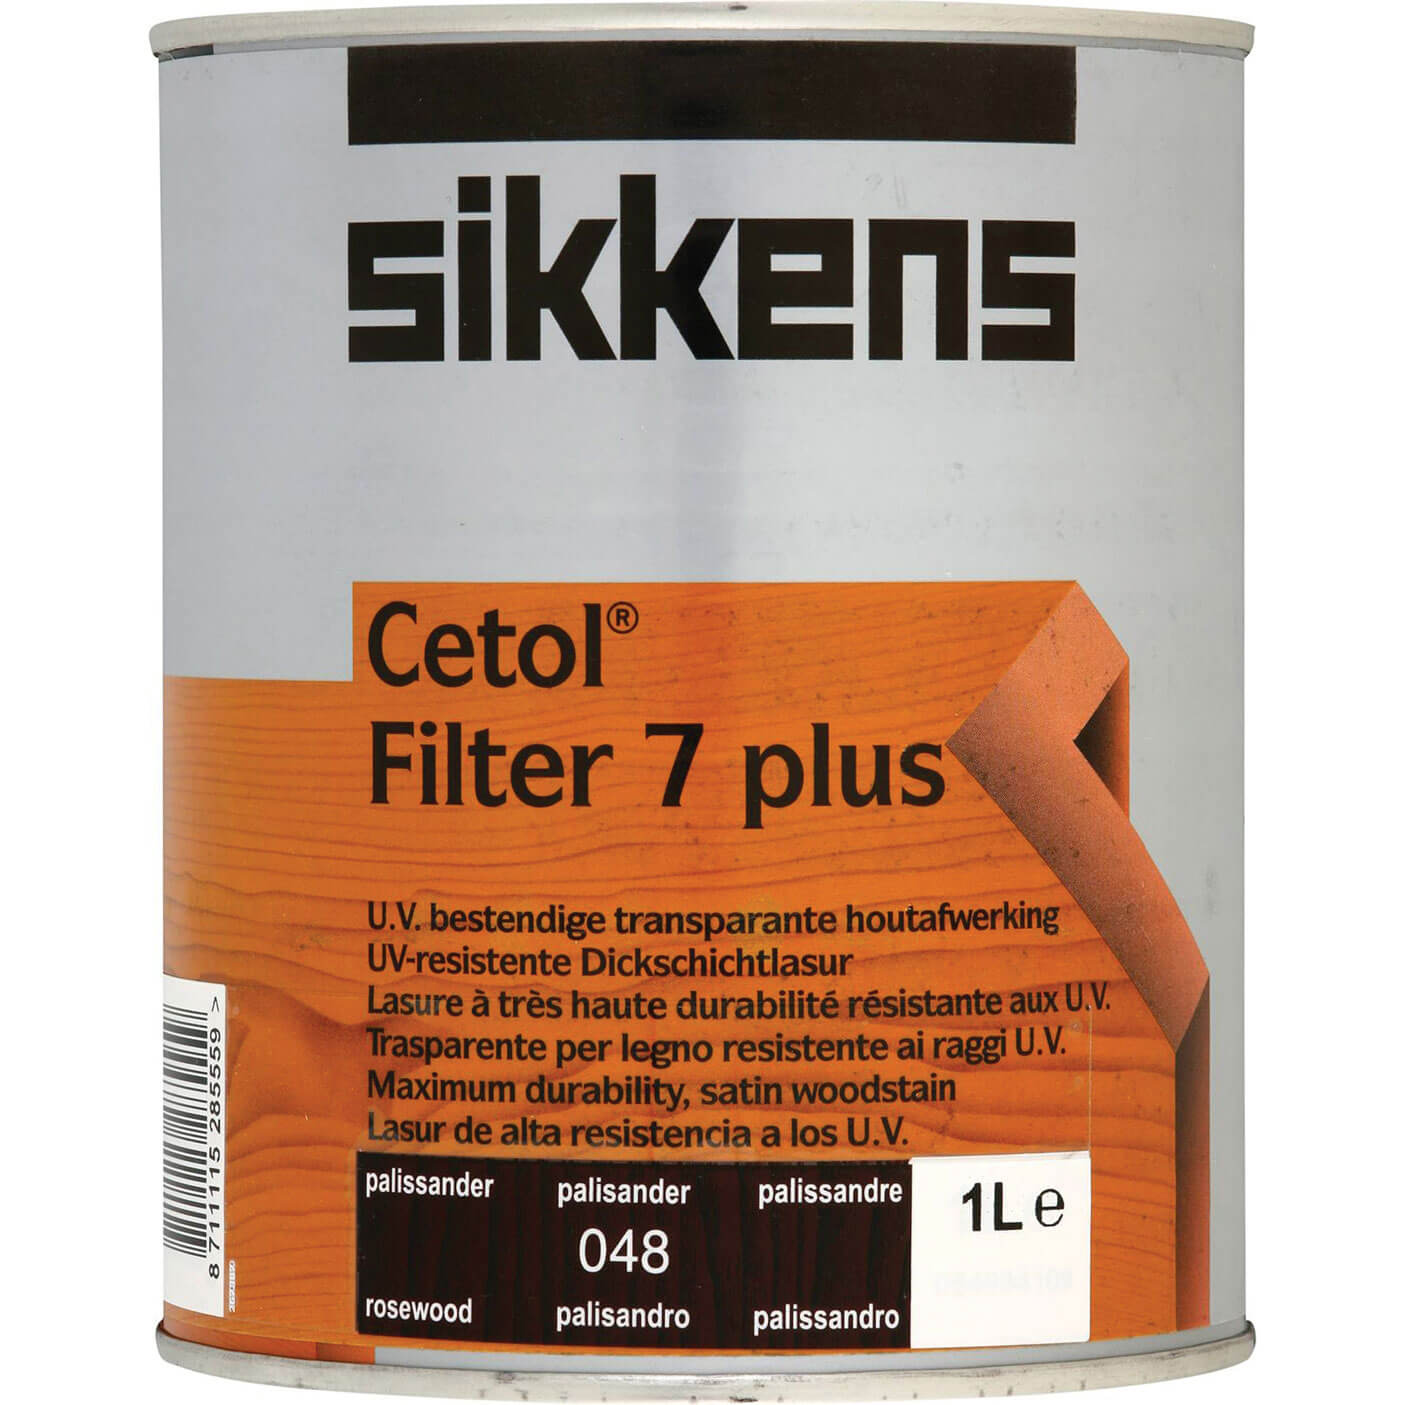 Sikkens Cetol Filter 7 Plus Translucent Wood Stain Rosewood 1 Litre